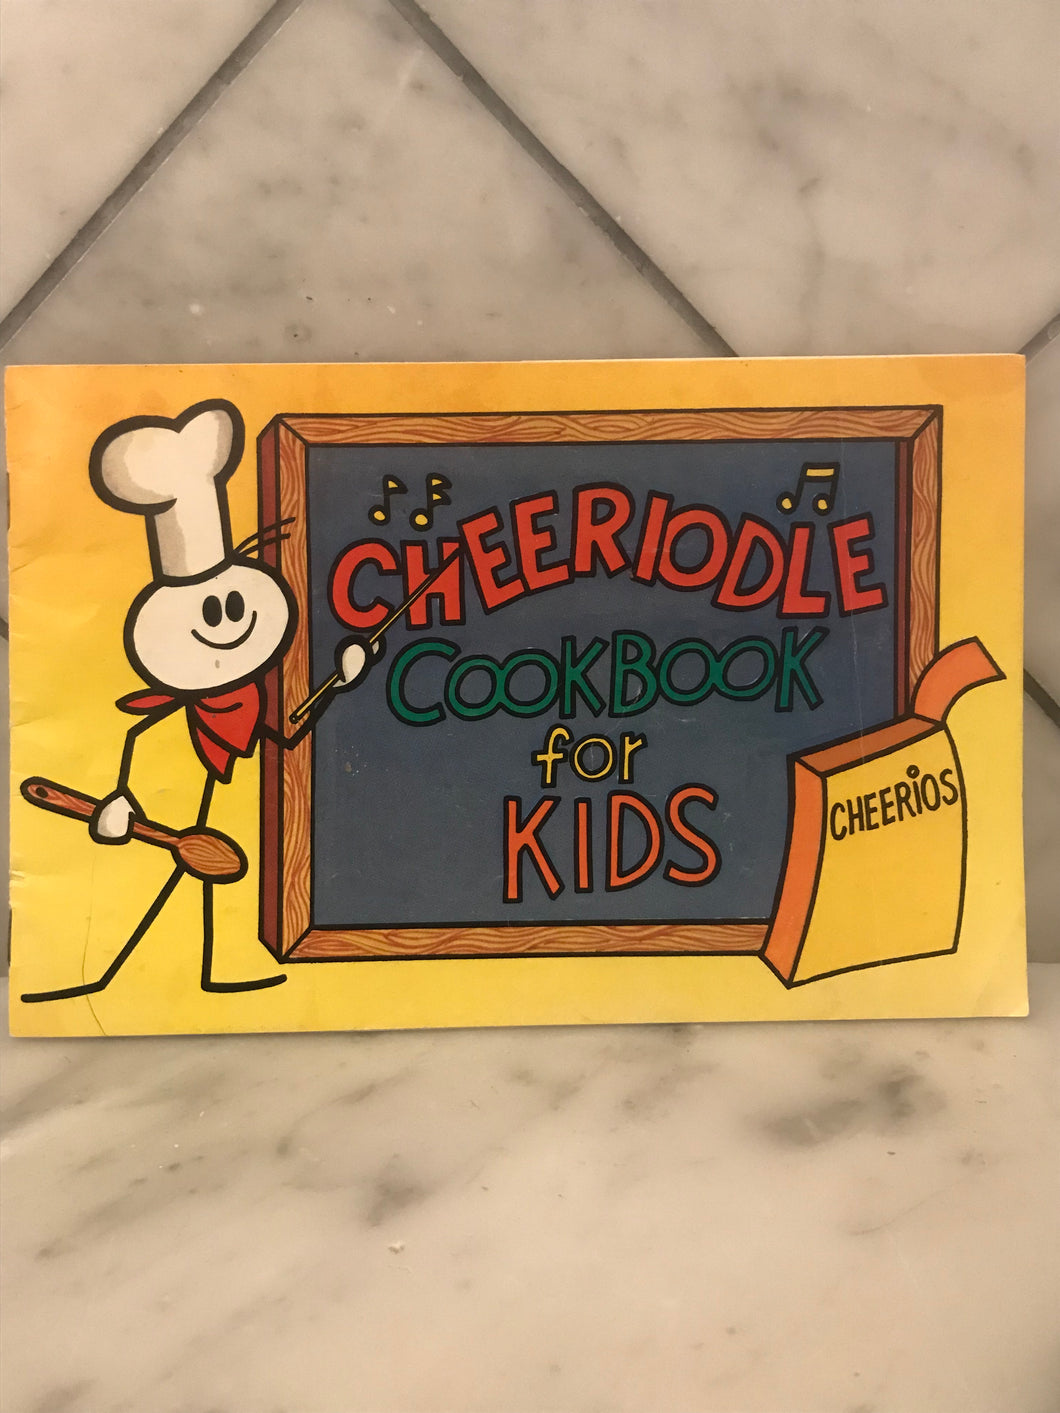 Cheeriodle Cookbook for Kids